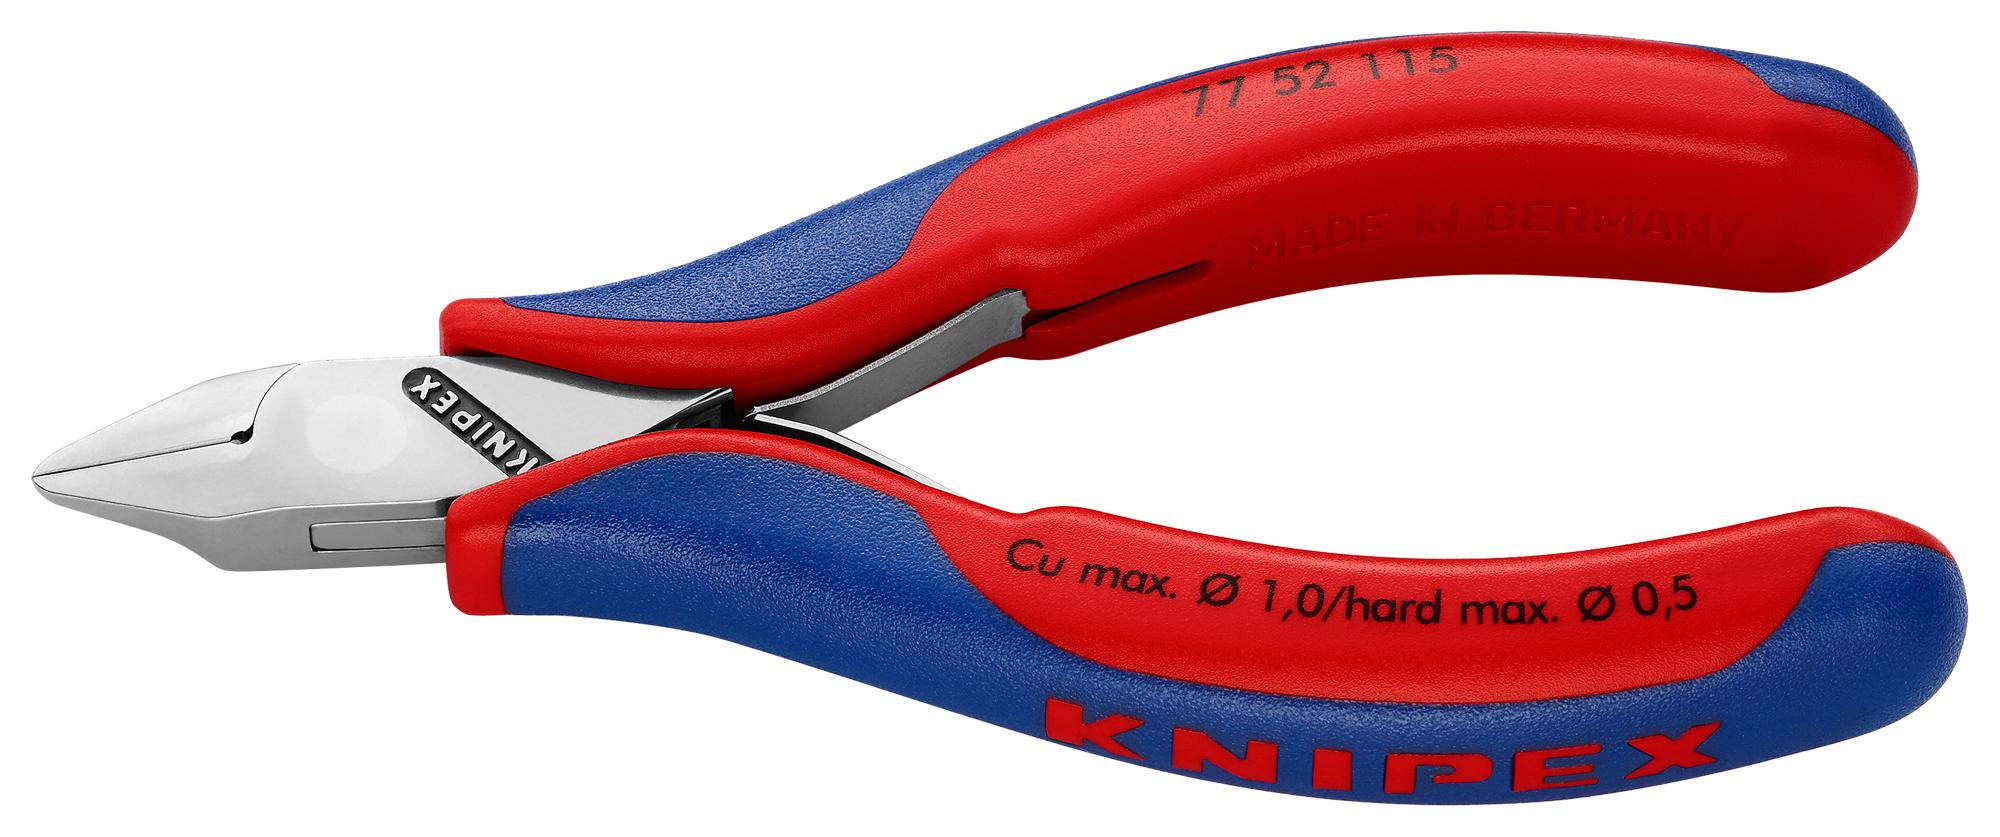 7752115 CUTTER, RED HANDLES KNIPEX